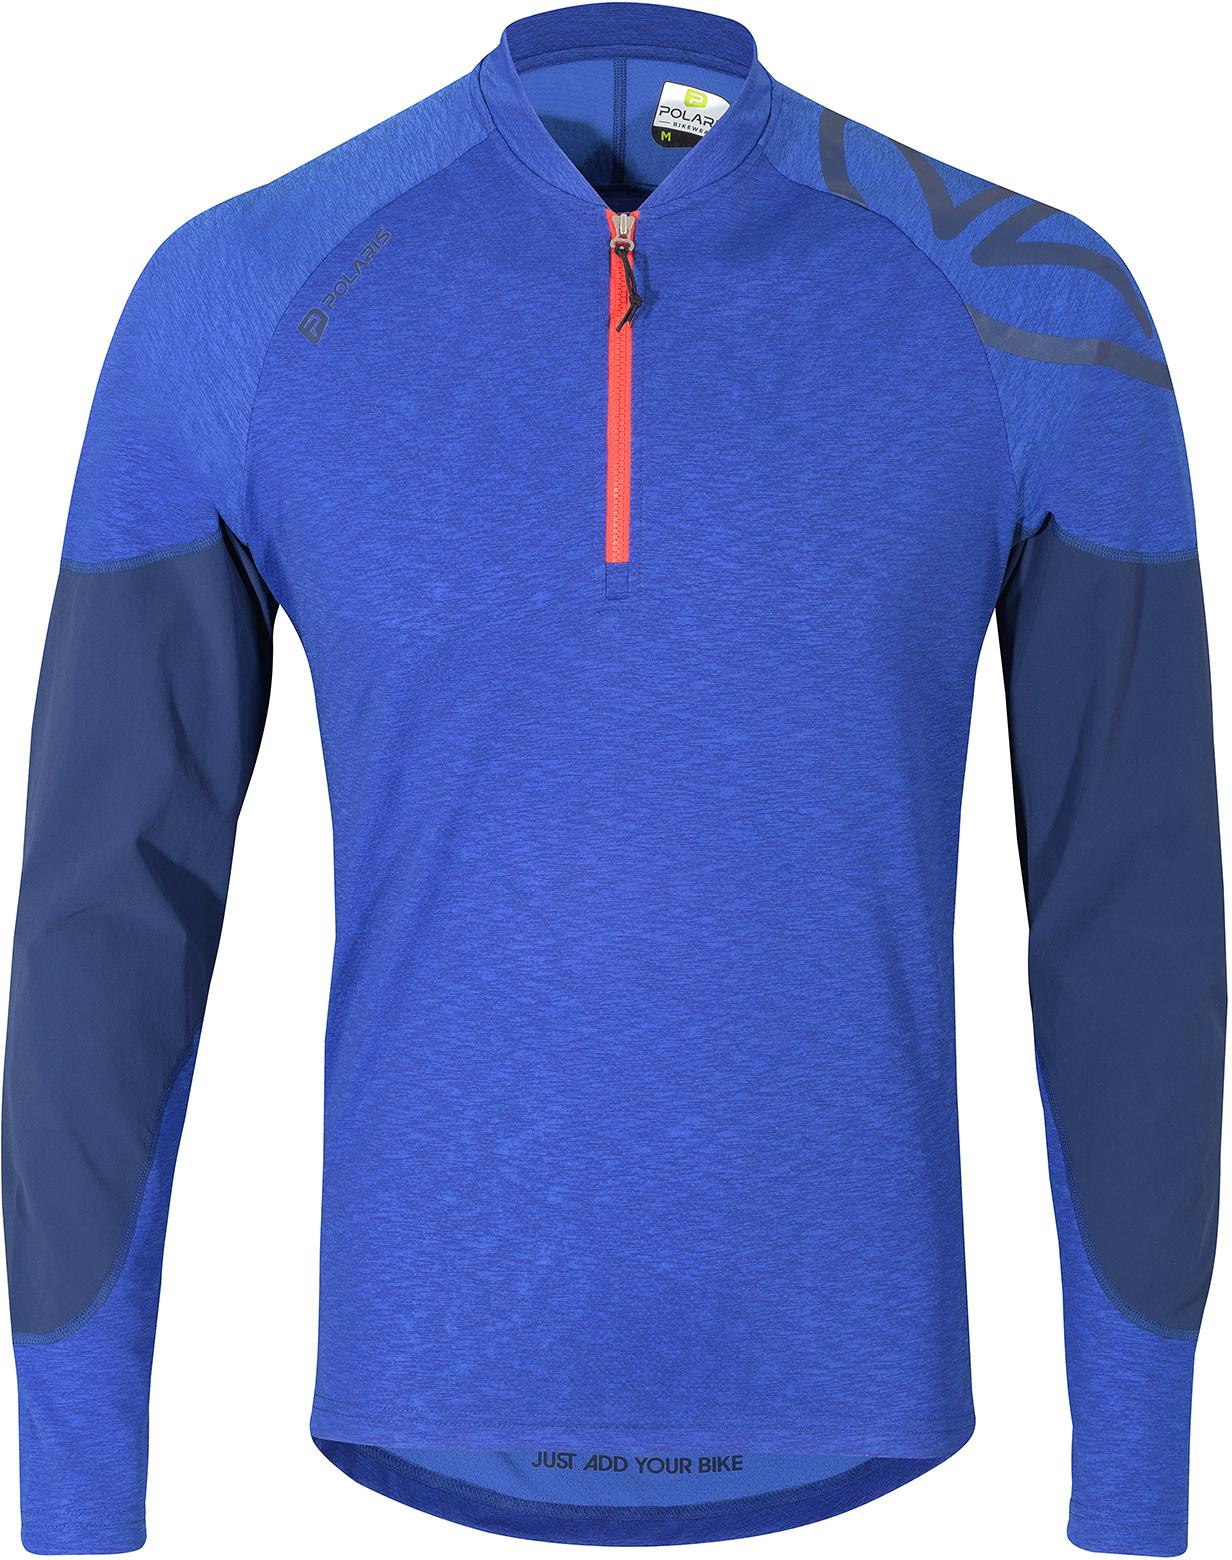 Polaris Overland Cycling Jersey, Blue, S